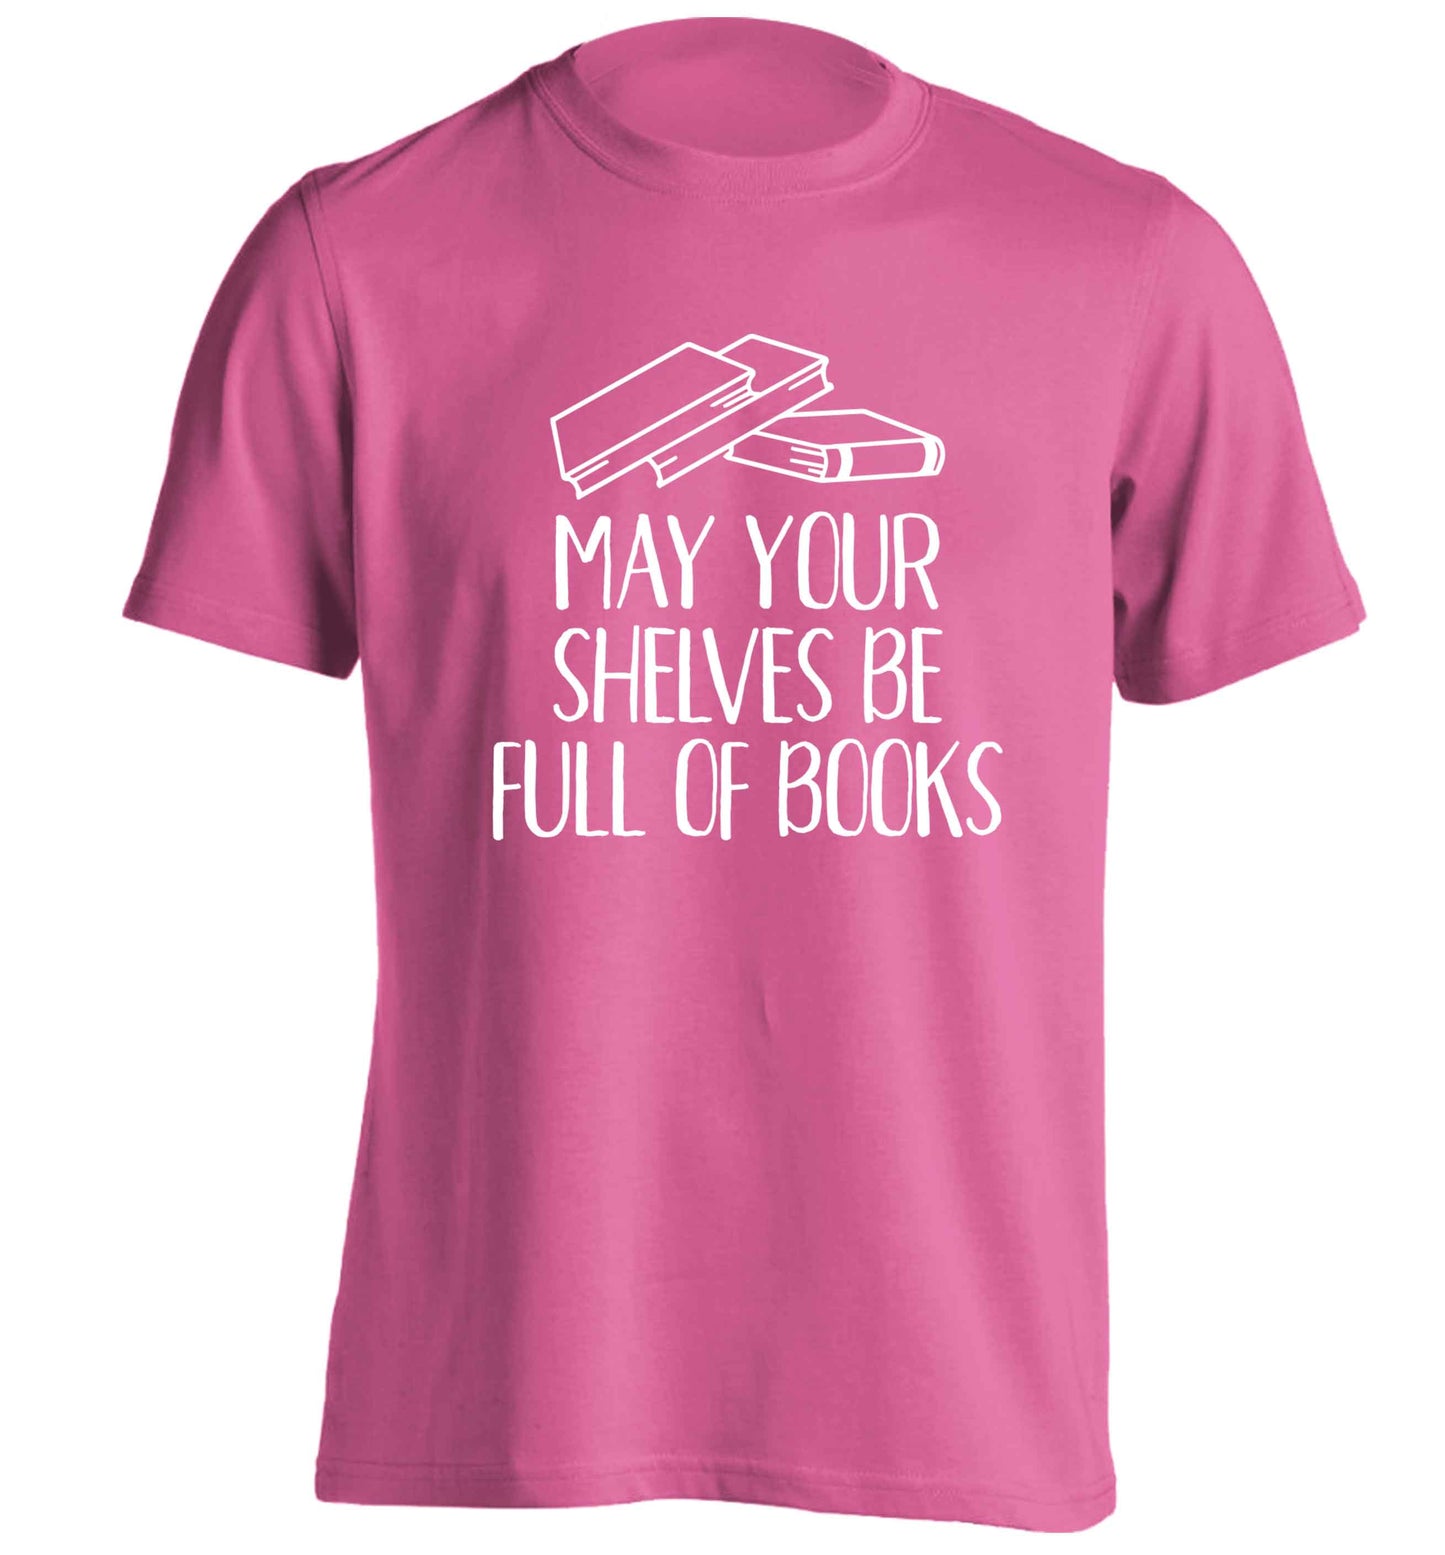 May your shelves be full of books adults unisex pink Tshirt 2XL